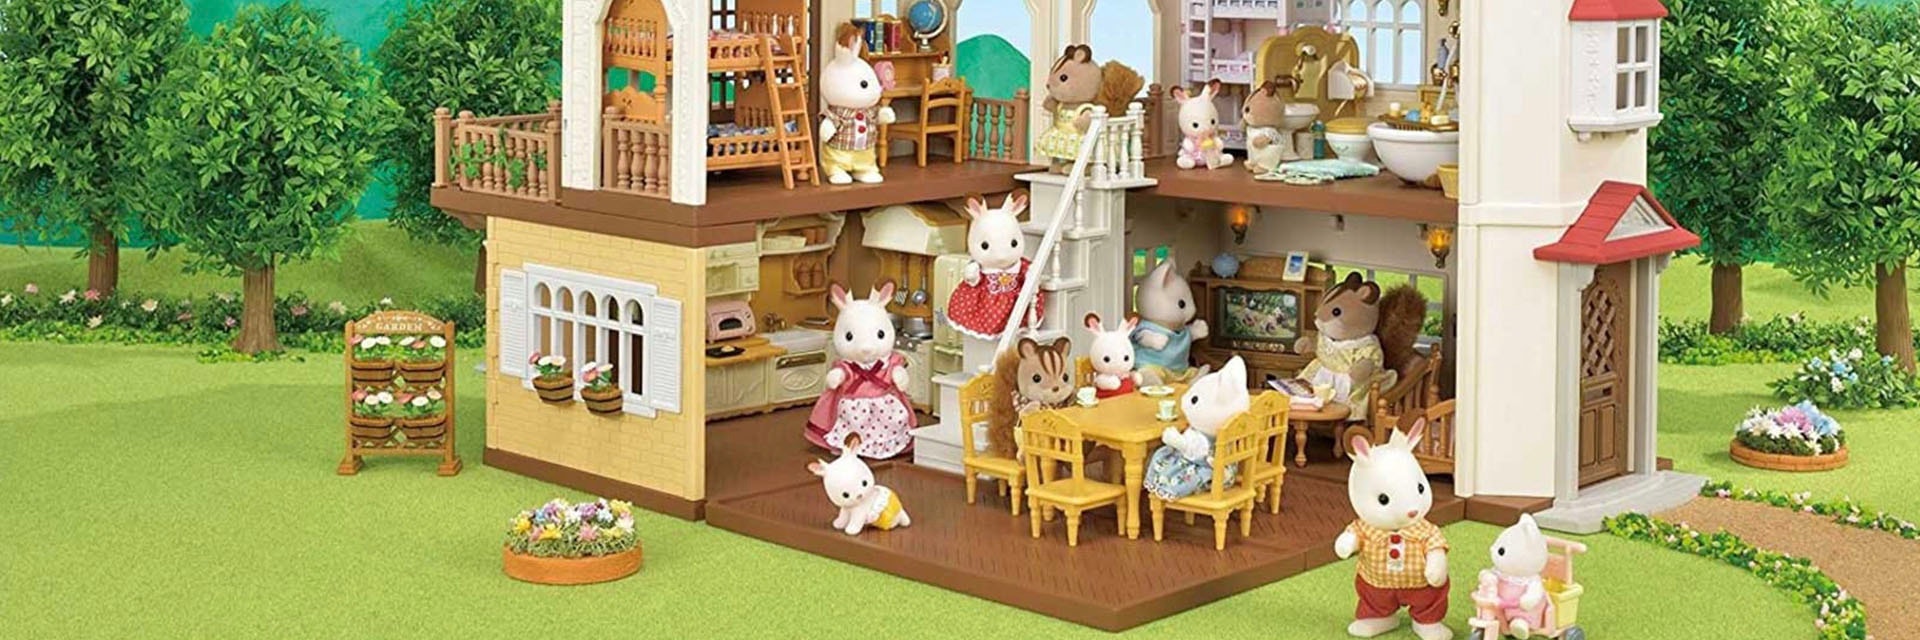 Toy house with many animal figurines inside